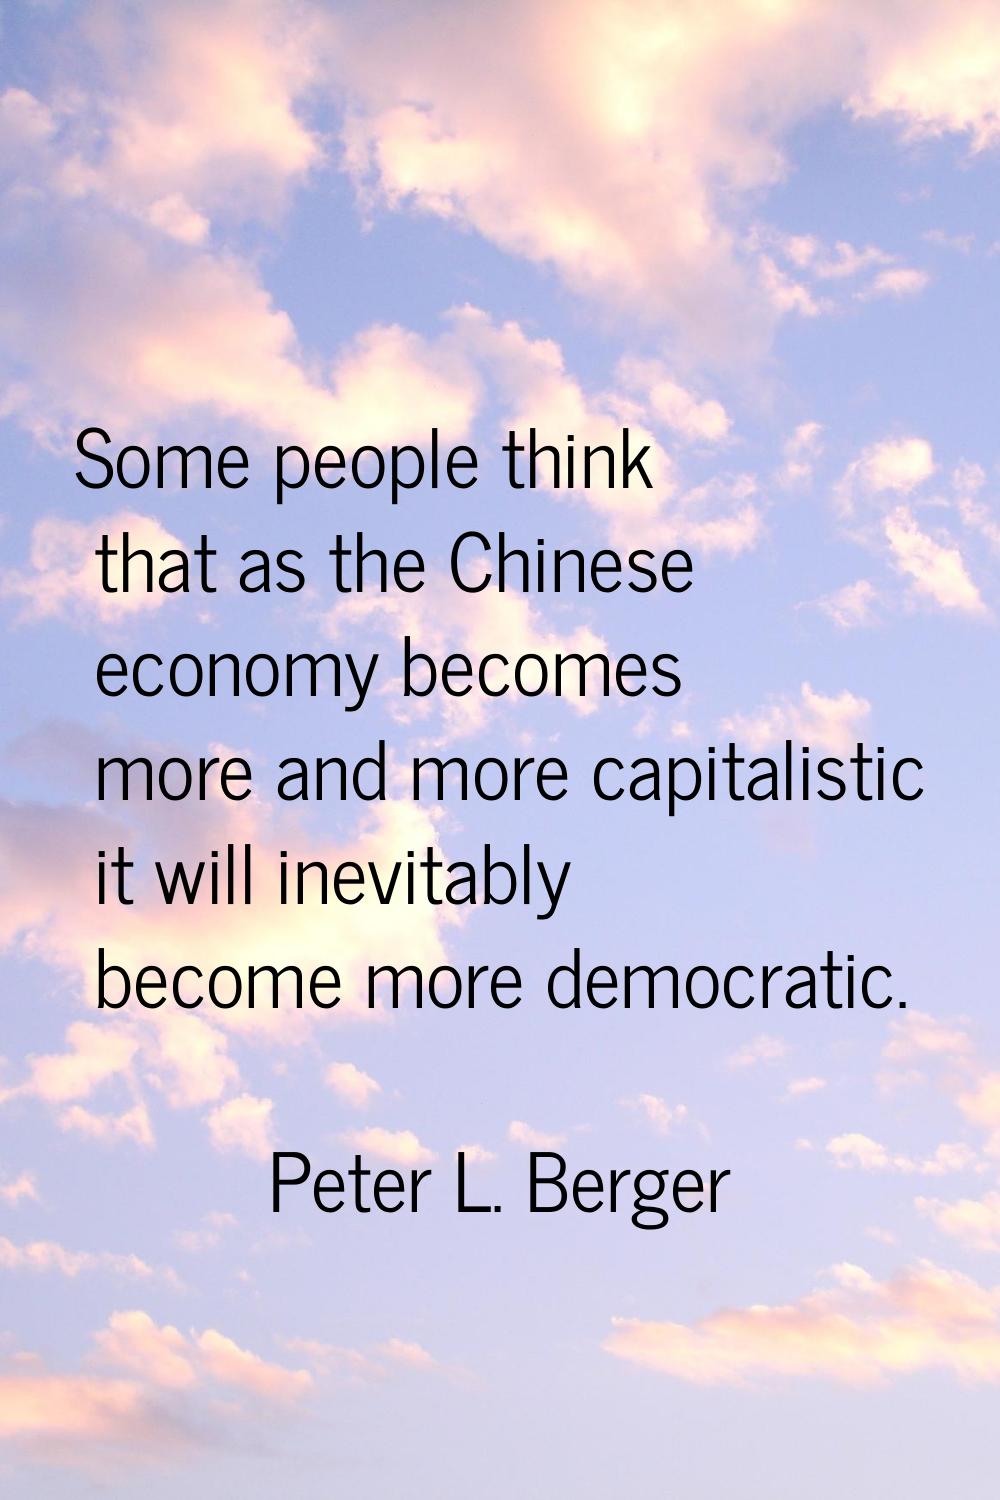 Some people think that as the Chinese economy becomes more and more capitalistic it will inevitably